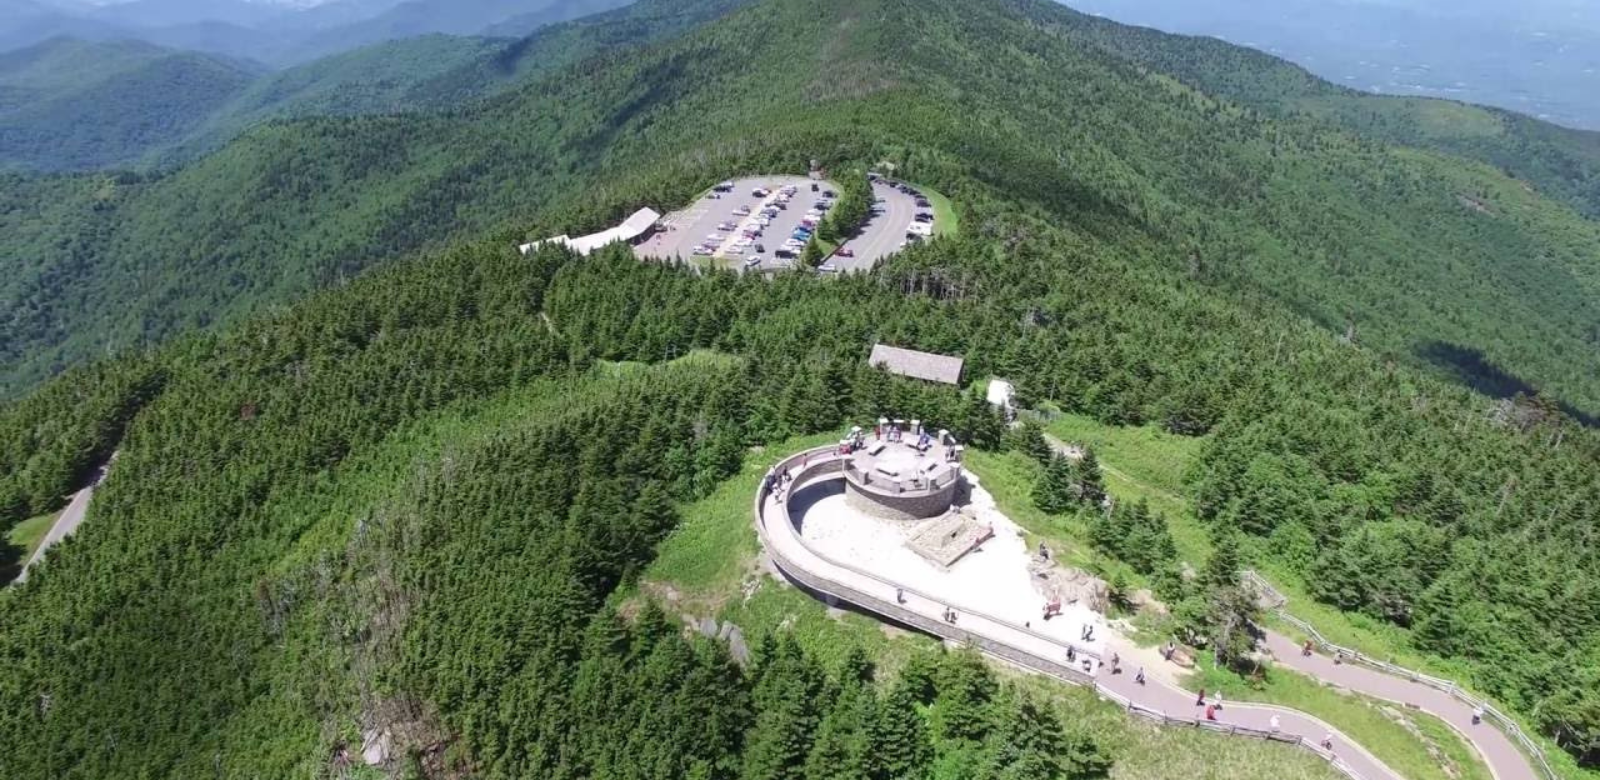 Visit Mt. Mitchell , the highest peak east of the Mississippi.